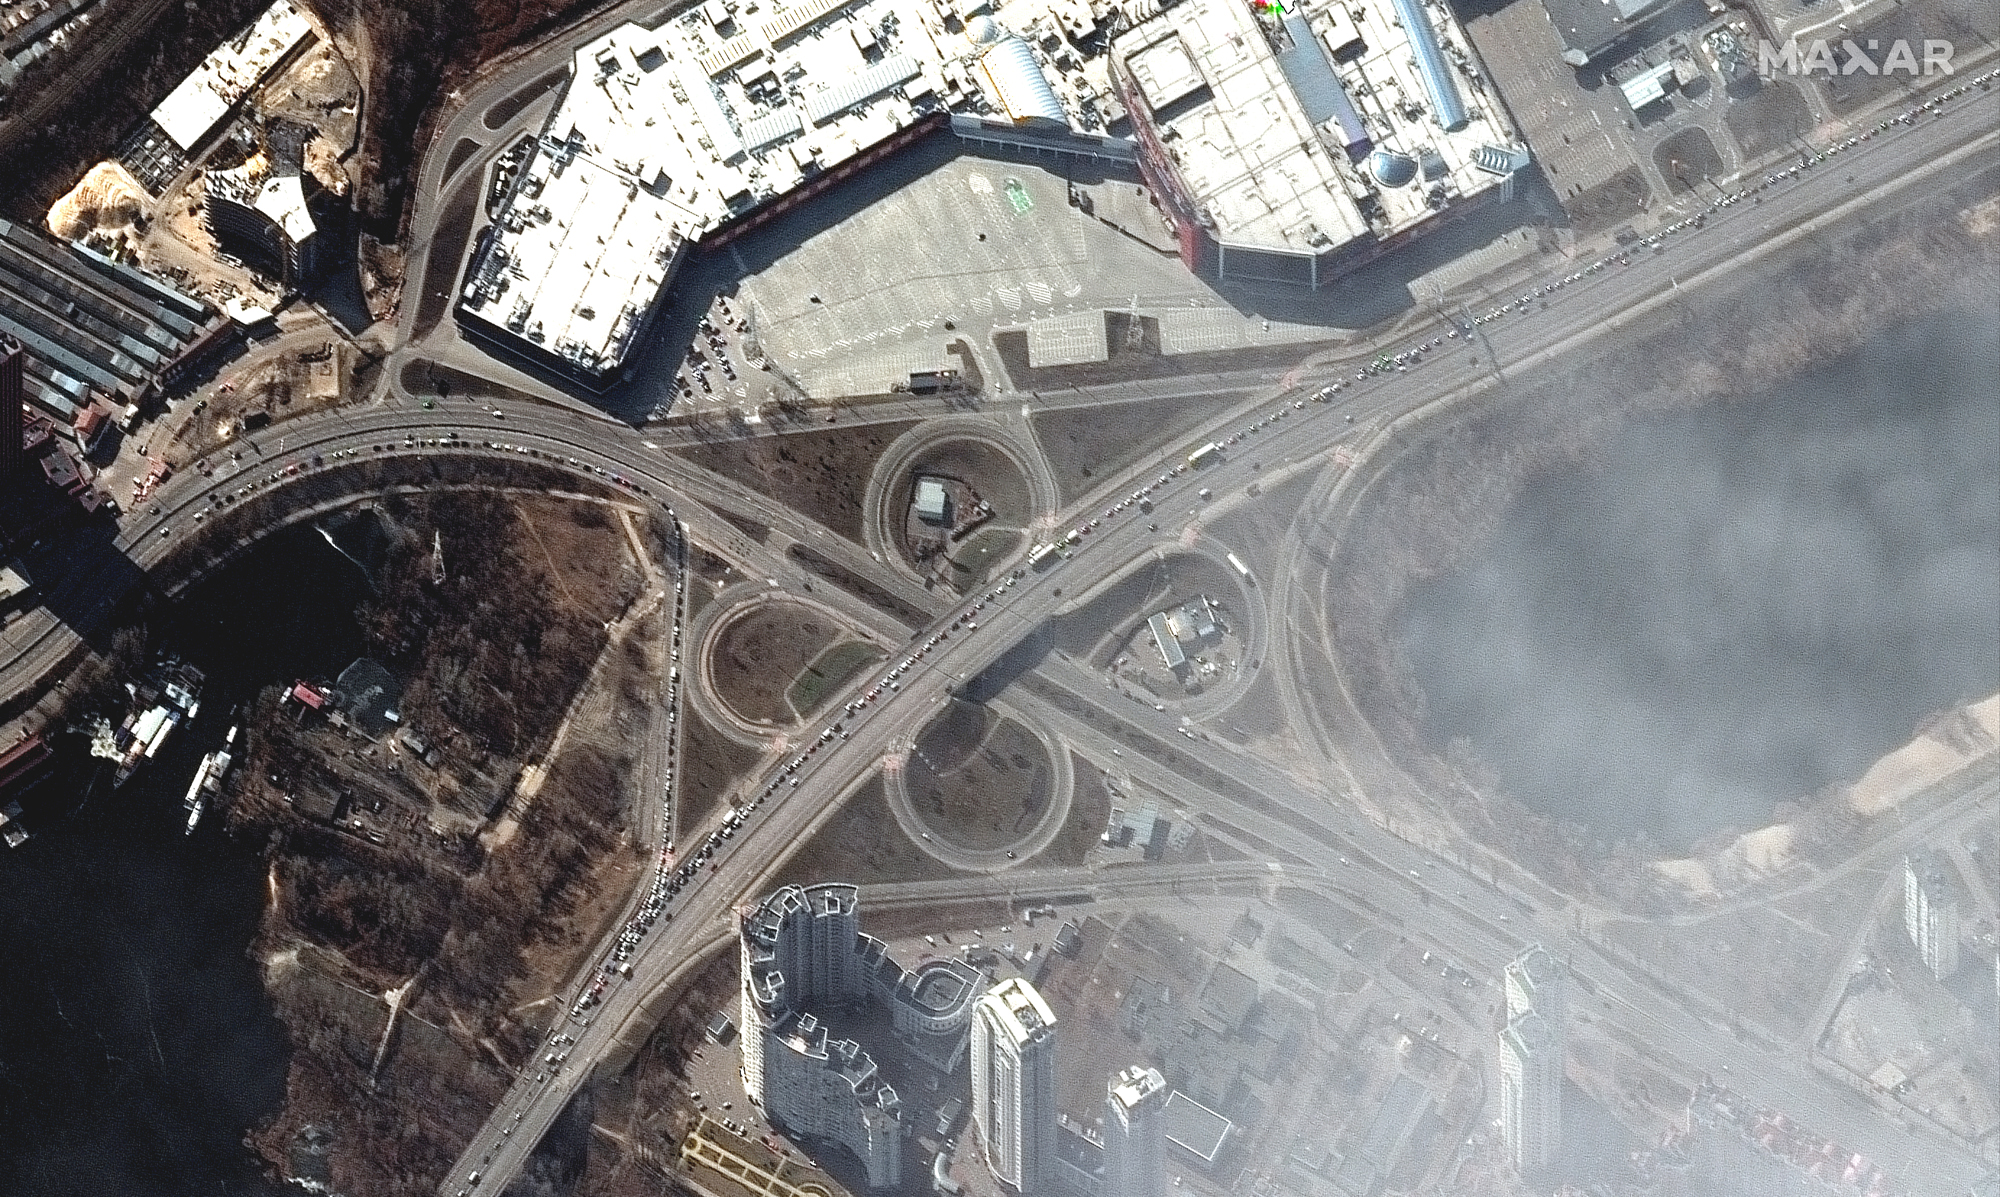 People and long line of cars trying to leave Kyiv, Ukraine on March 11, 2022 as seen by the WorldView-2 satellite for Maxar Technologies.